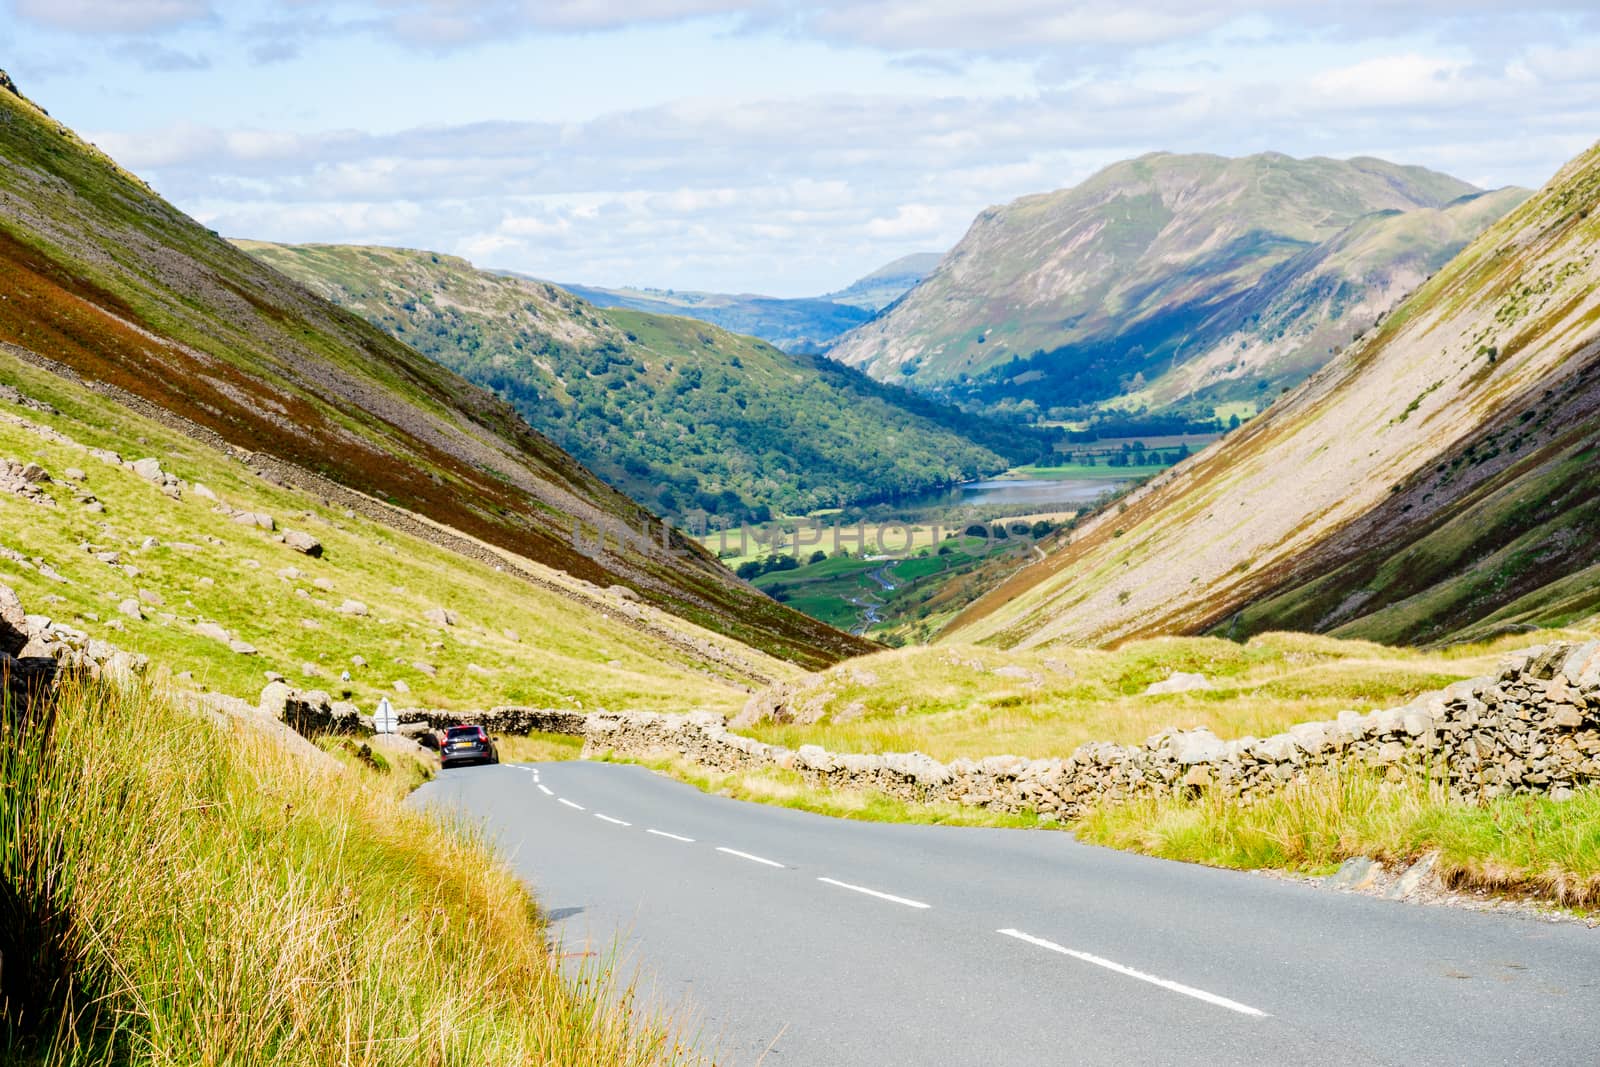 The Kirkstone Pass road in the English Lake District, by paddythegolfer